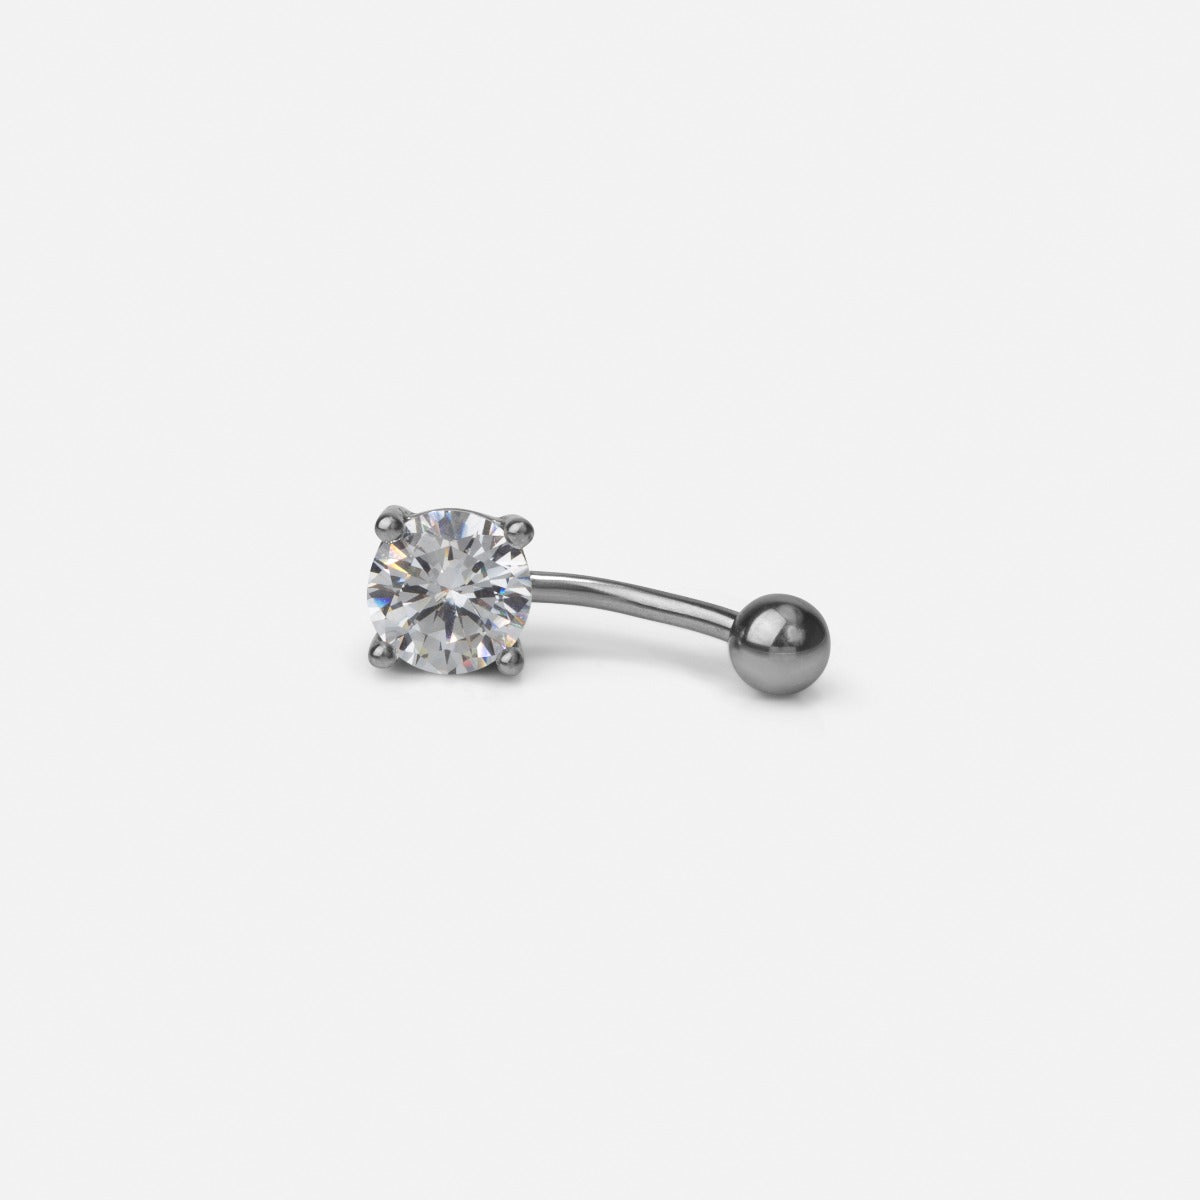 Stainless steel belly button ring with cubic zirconia stone   